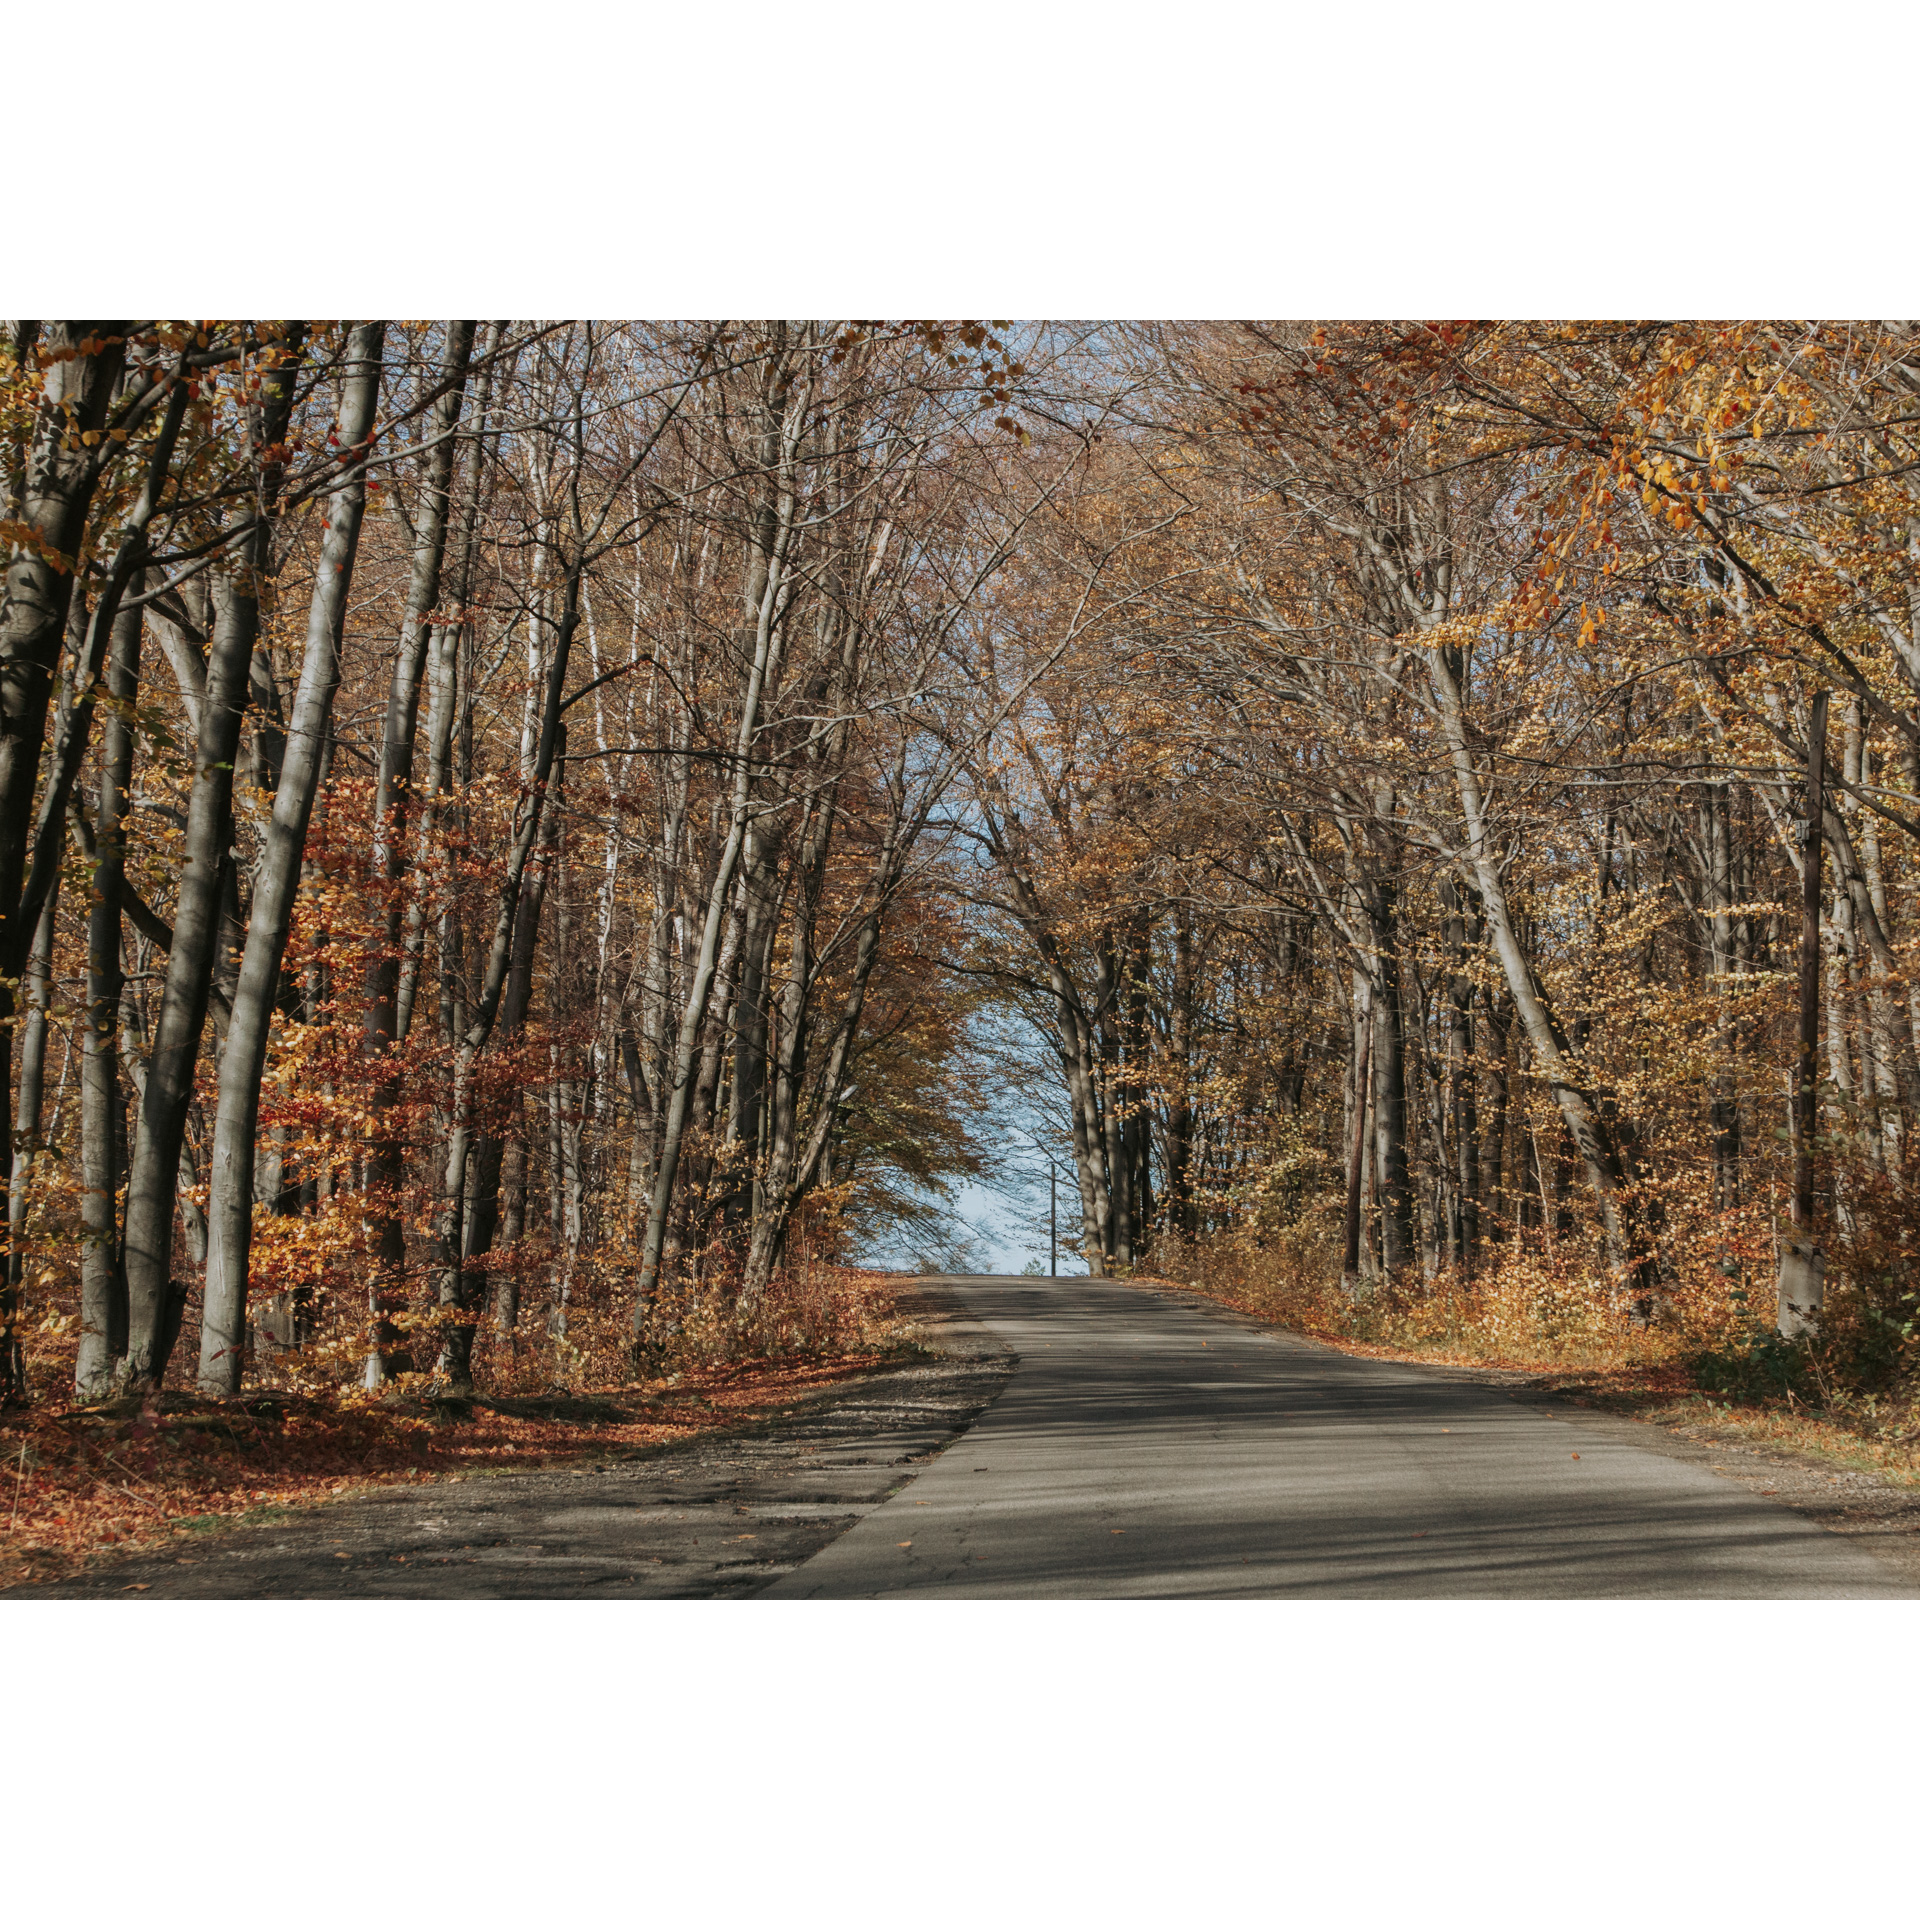 Forest asphalt road leading up among deciduous trees with brown leaves